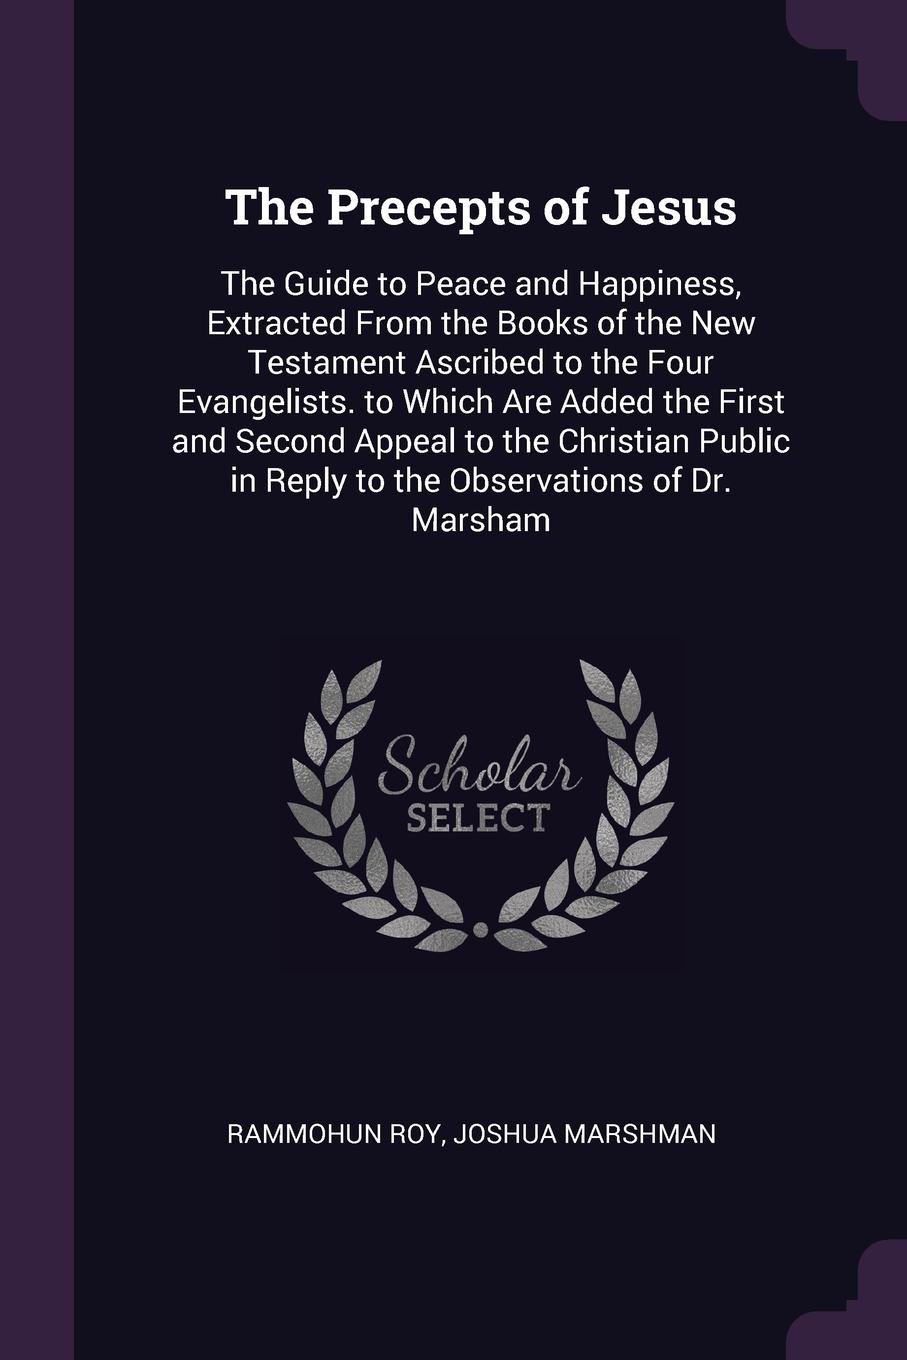 The Precepts of Jesus. The Guide to Peace and Happiness, Extracted From the Books of the New Testament Ascribed to the Four Evangelists. to Which Are Added the First and Second Appeal to the Christian Public in Reply to the Observations of Dr. Mar...